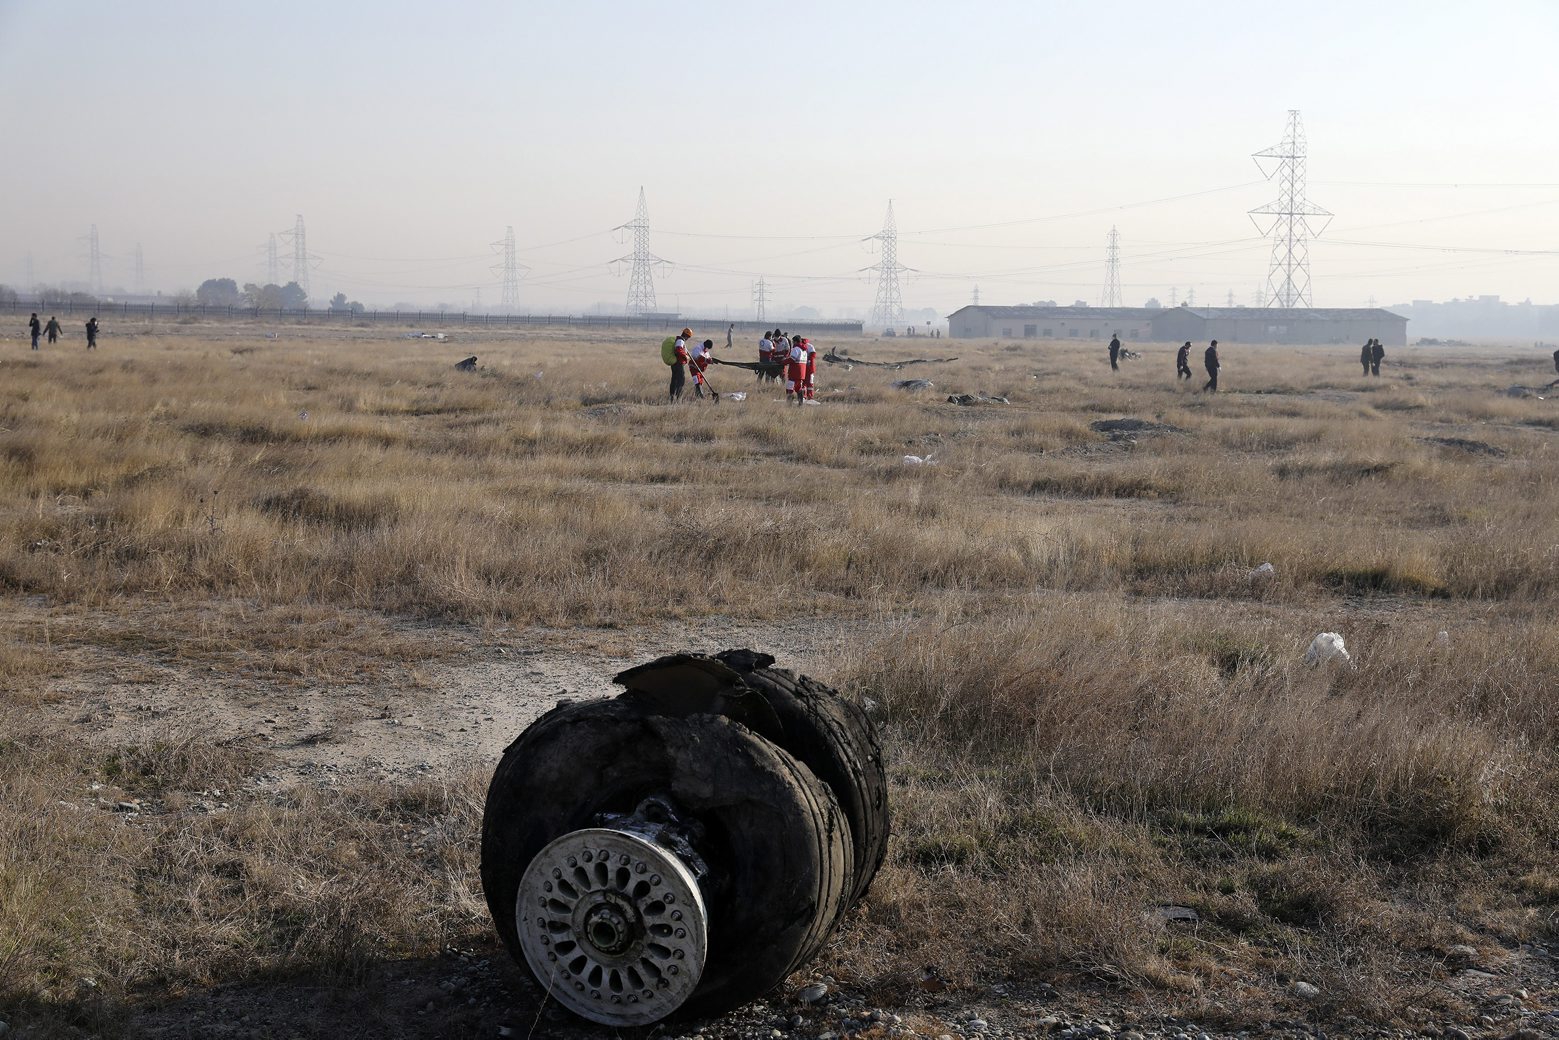 Debris is seen from an Ukrainian plane which crashed as rescue workers search the scene in Shahedshahr, southwest of the capital Tehran, Iran, Wednesday, Jan. 8, 2020. A Ukrainian airplane carrying 176 people crashed on Wednesday shortly after takeoff from Tehran's main airport, killing all onboard. (AP Photo/Ebrahim Noroozi) Iran Plane Crash